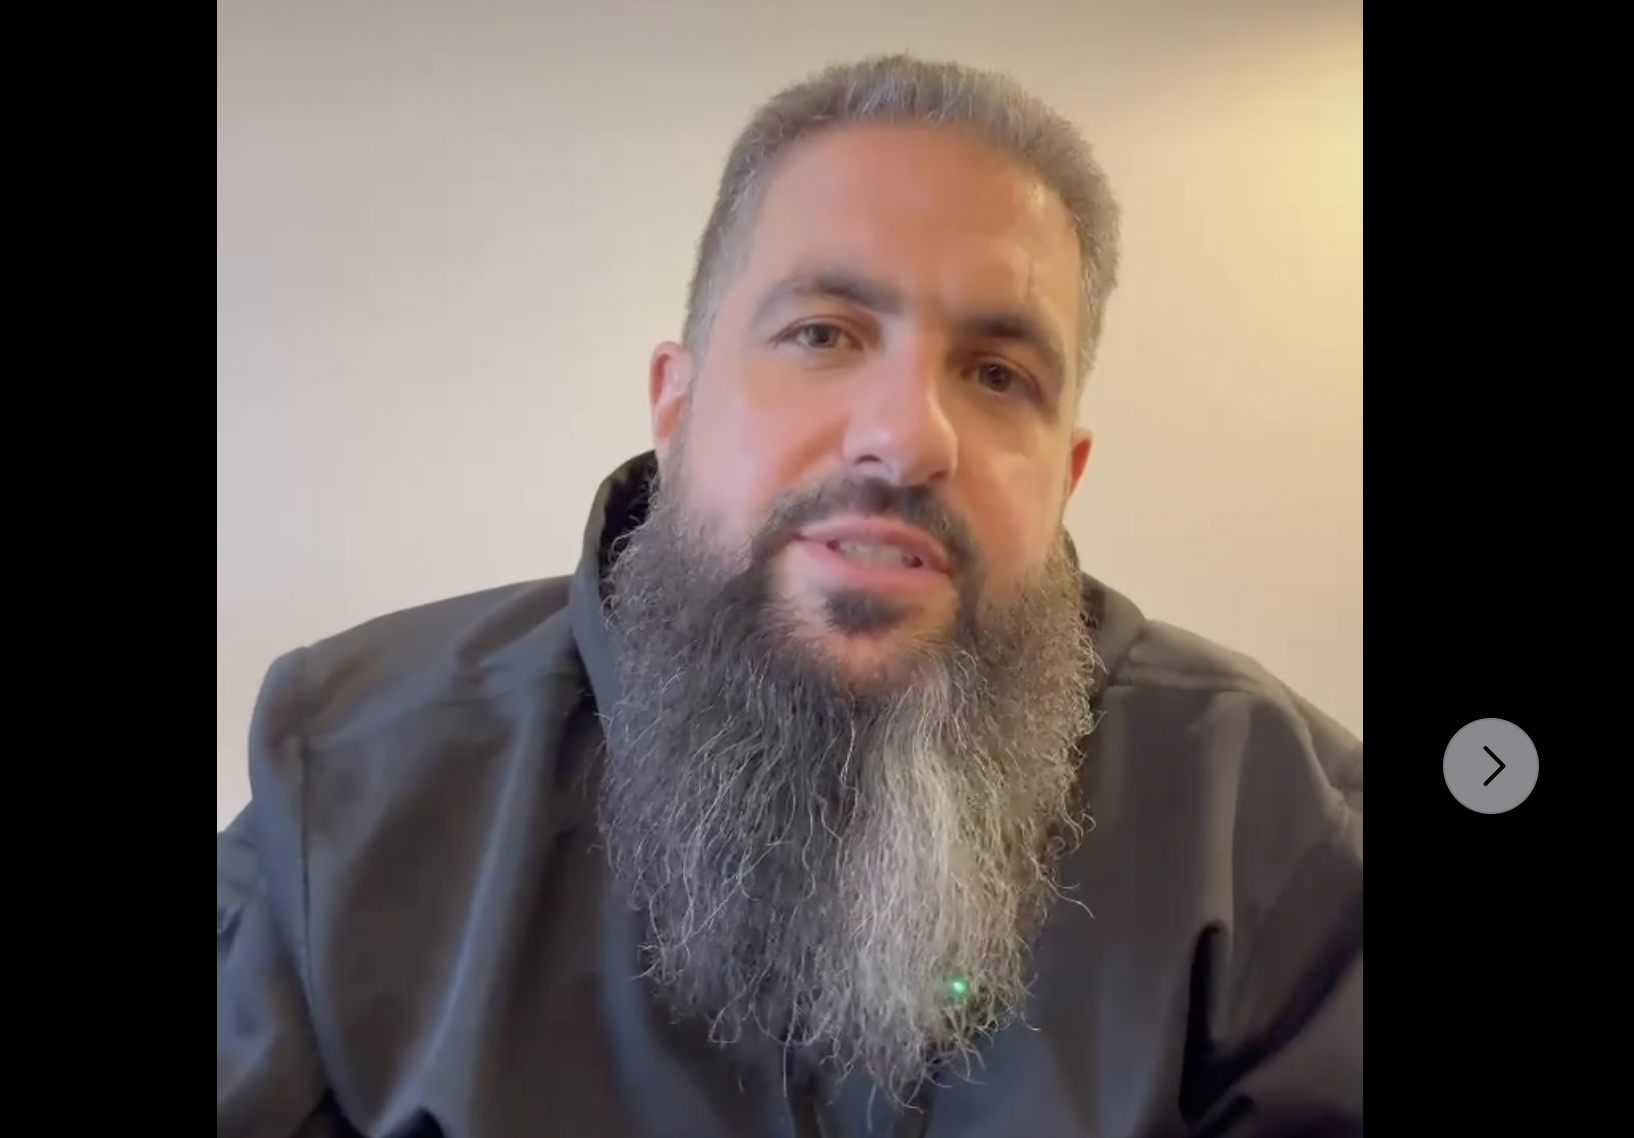 Radical Australian preacher banned from NL over extremism fears ...